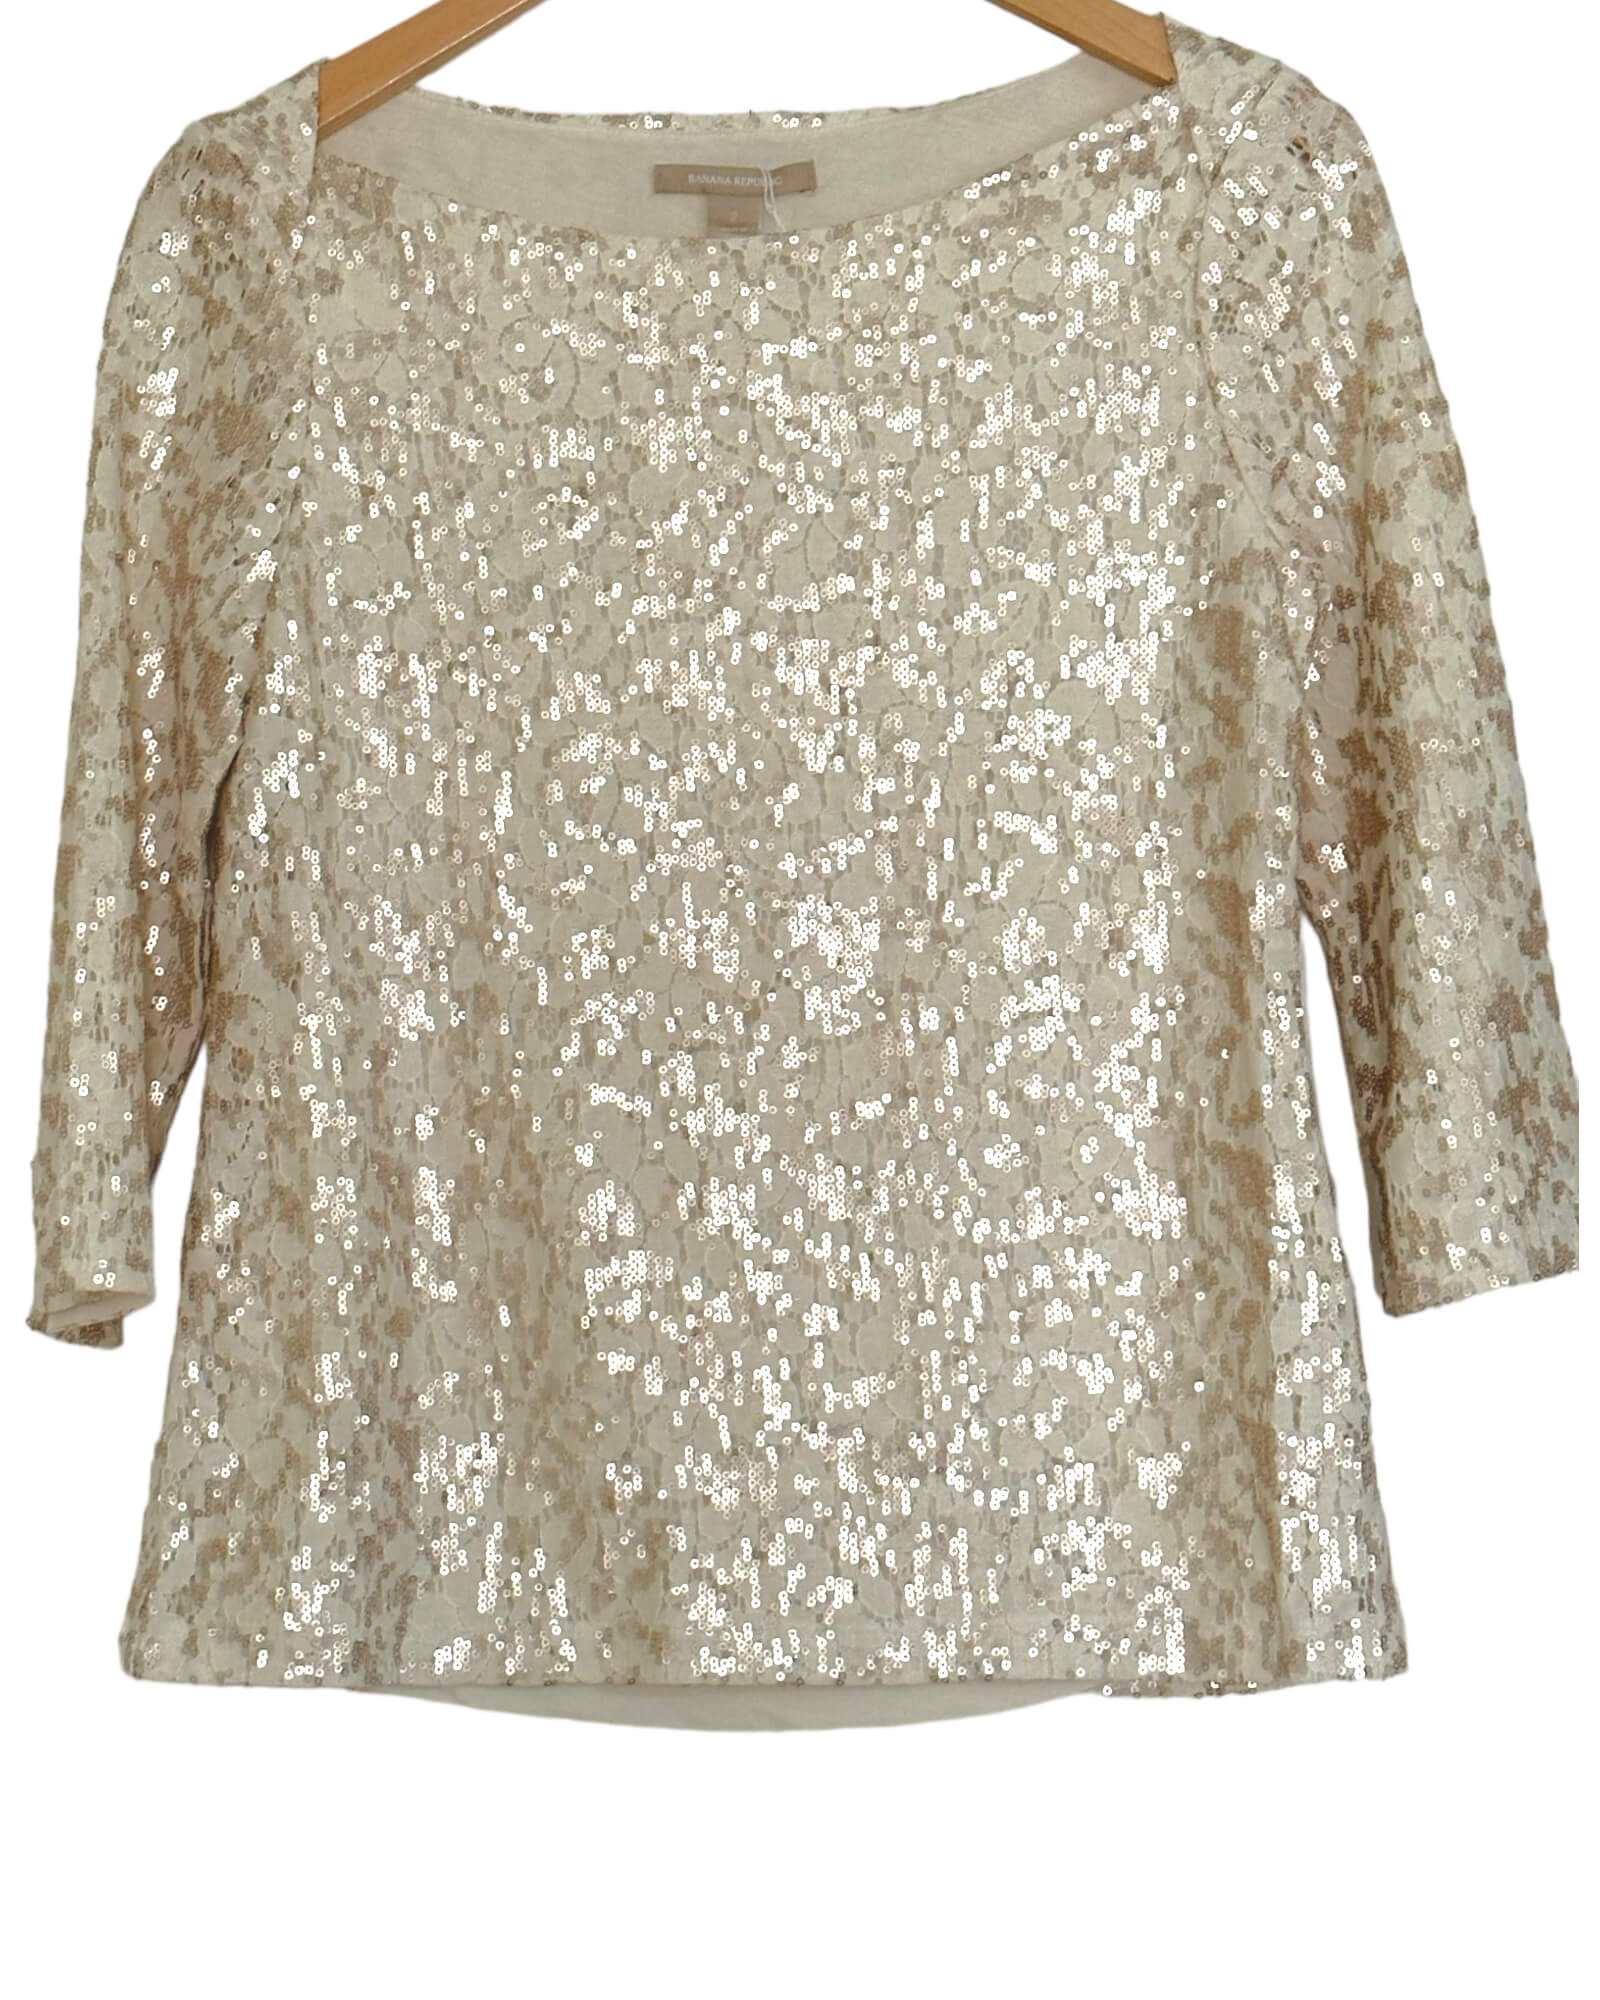 Light Spring BANANA REPUBLIC ivory lace sequin top